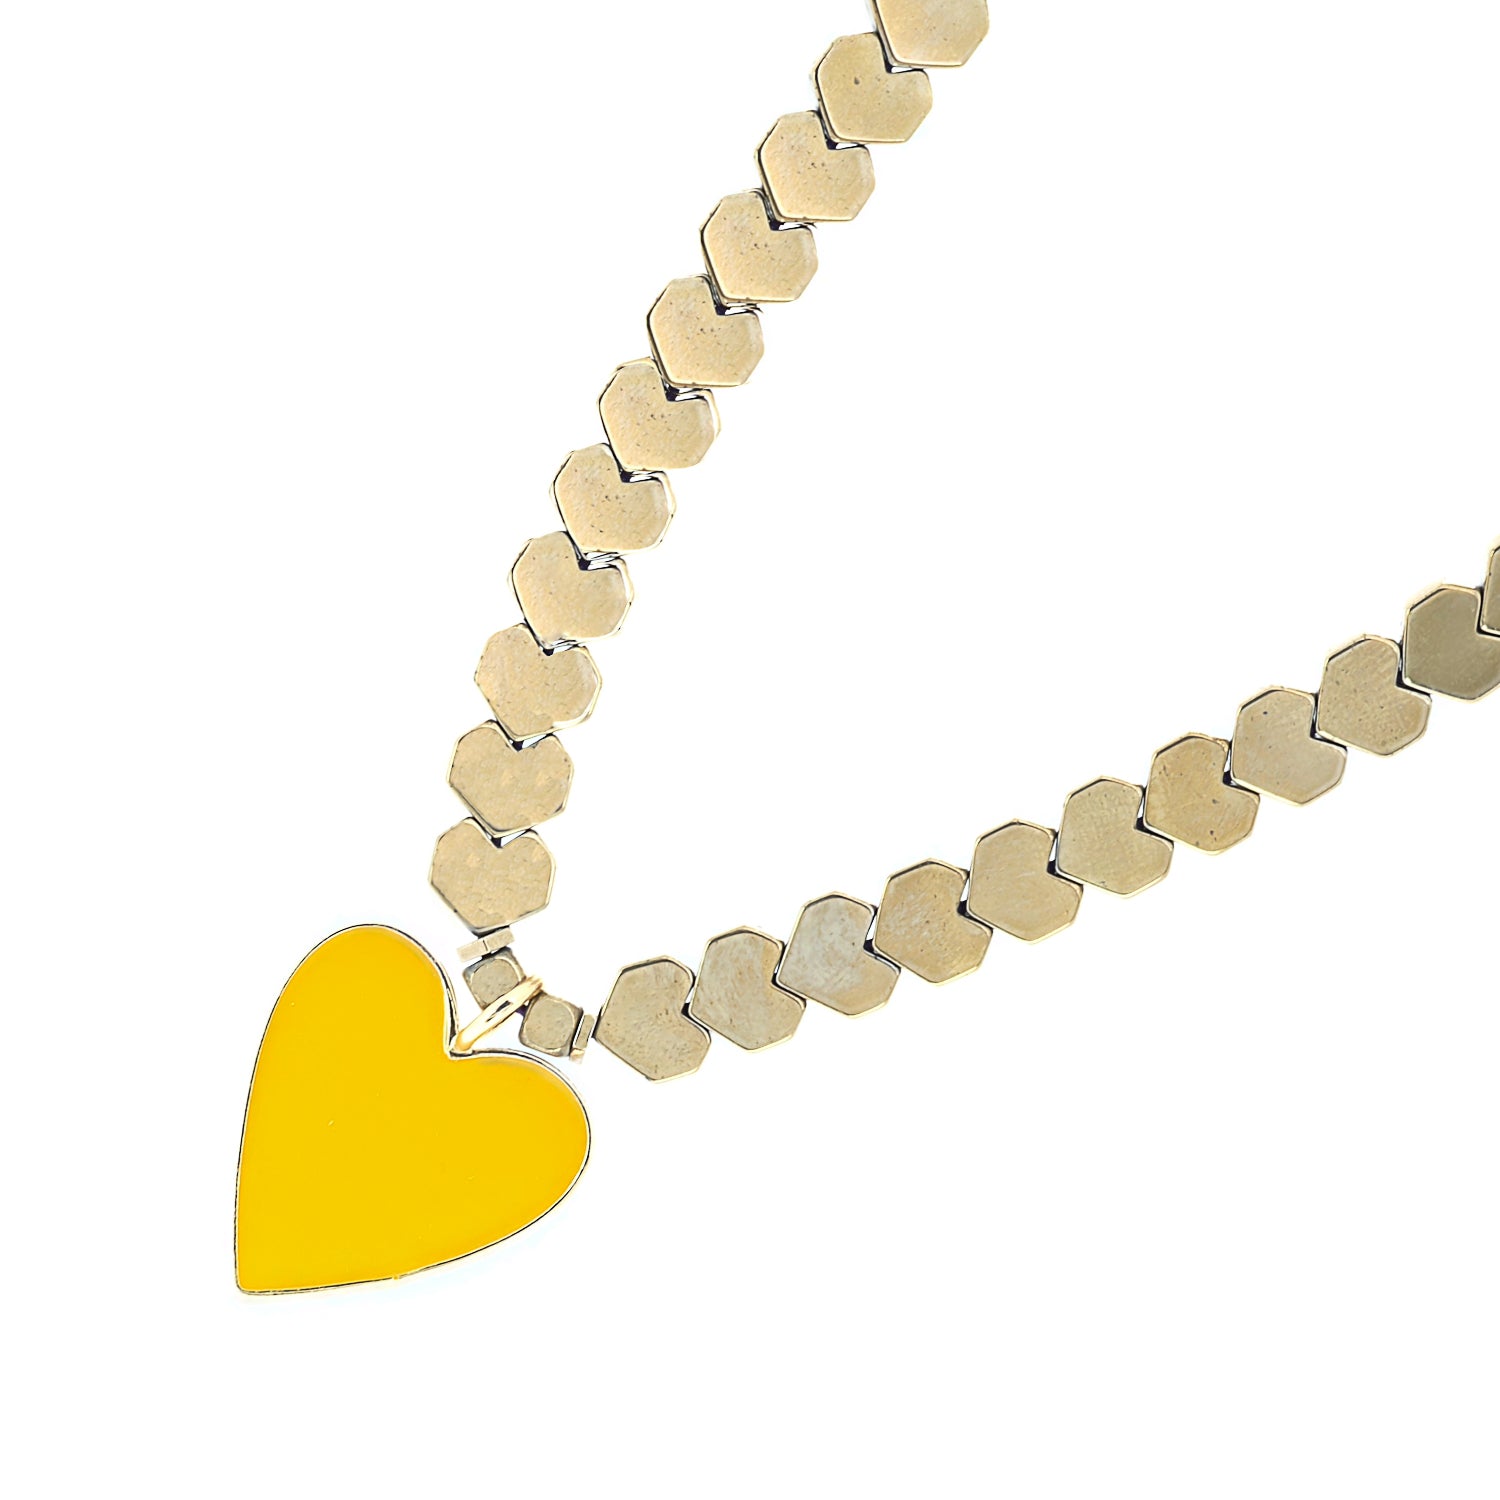 Golden Hue of Sunshine - The pendant&#39;s golden hue represents warmth and optimism.